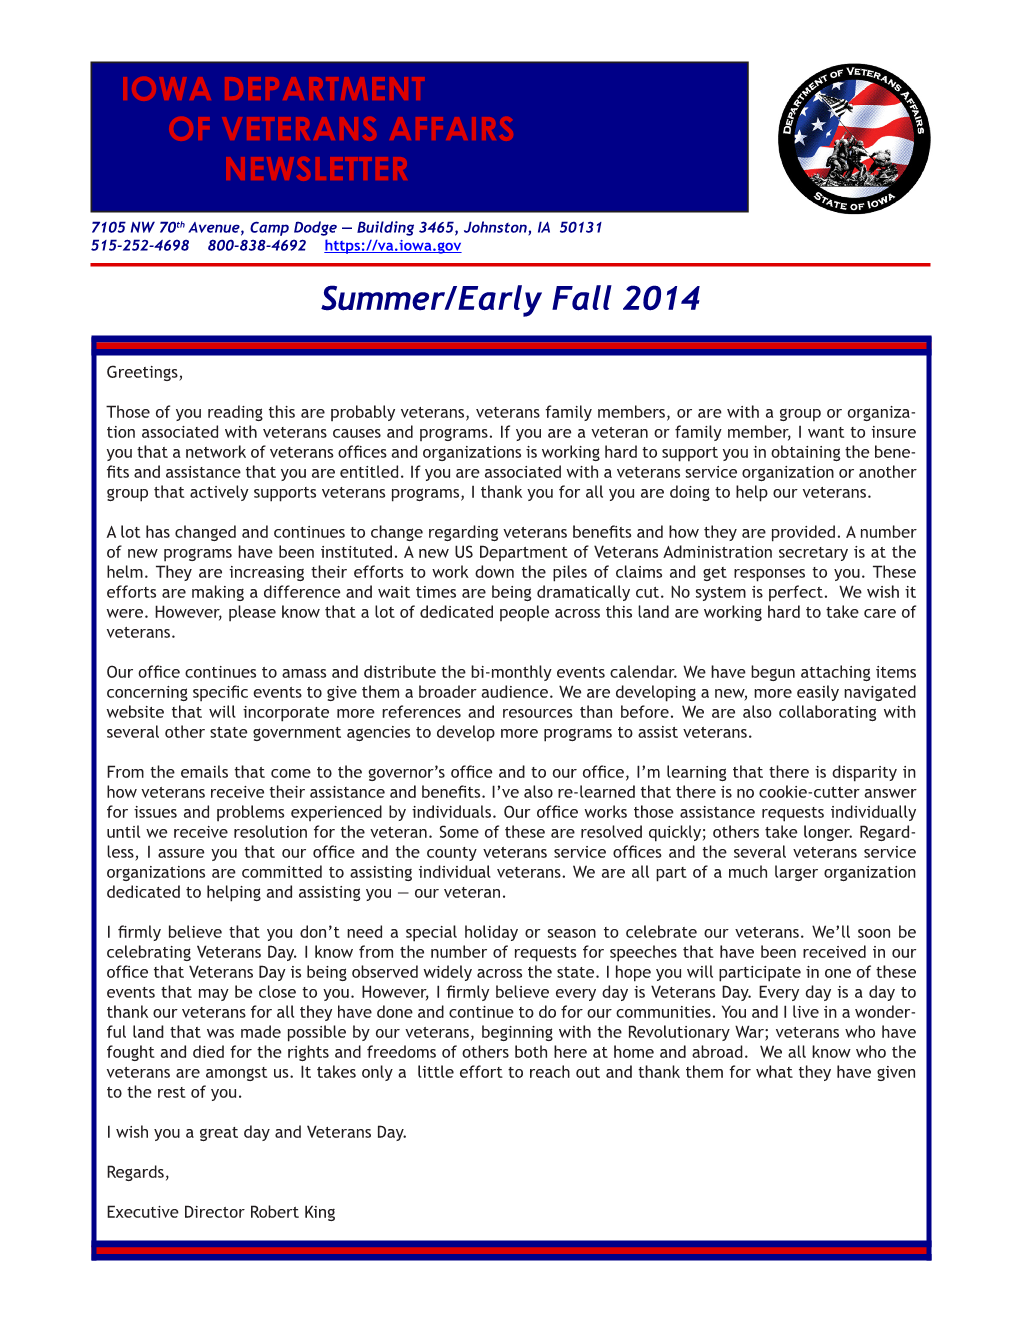 Summer/Early Fall 2014 IOWA DEPARTMENT of VETERANS AFFAIRS NEWSLETTER